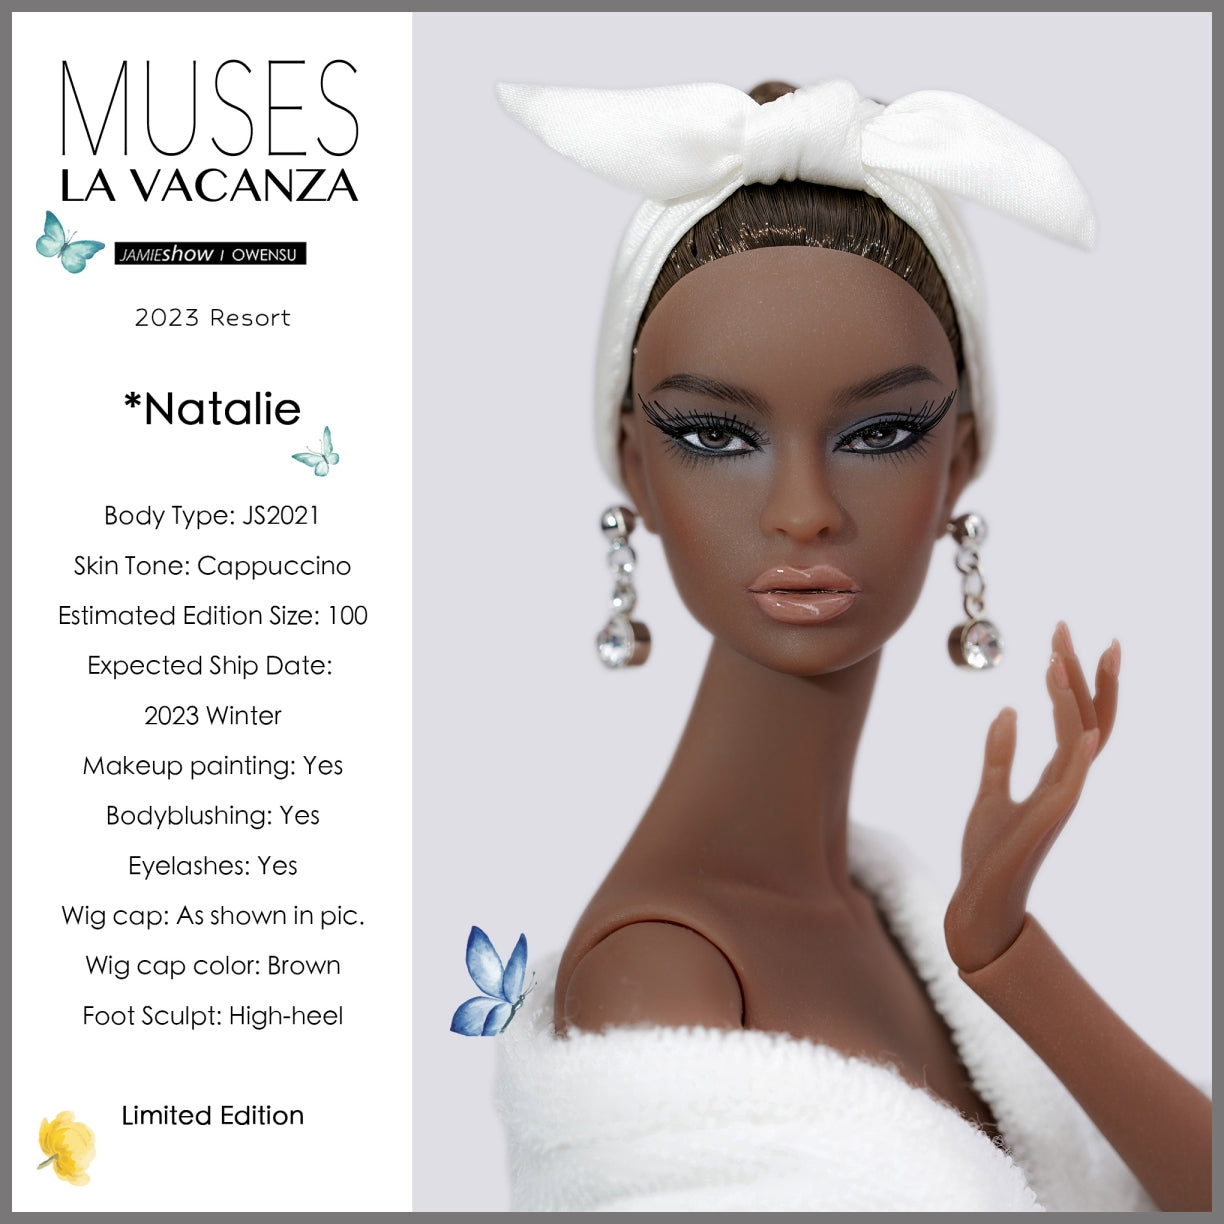 Muses La Vacanza Natalie Dressed Doll, Pre-Oder for Winter 2023 Delivery.